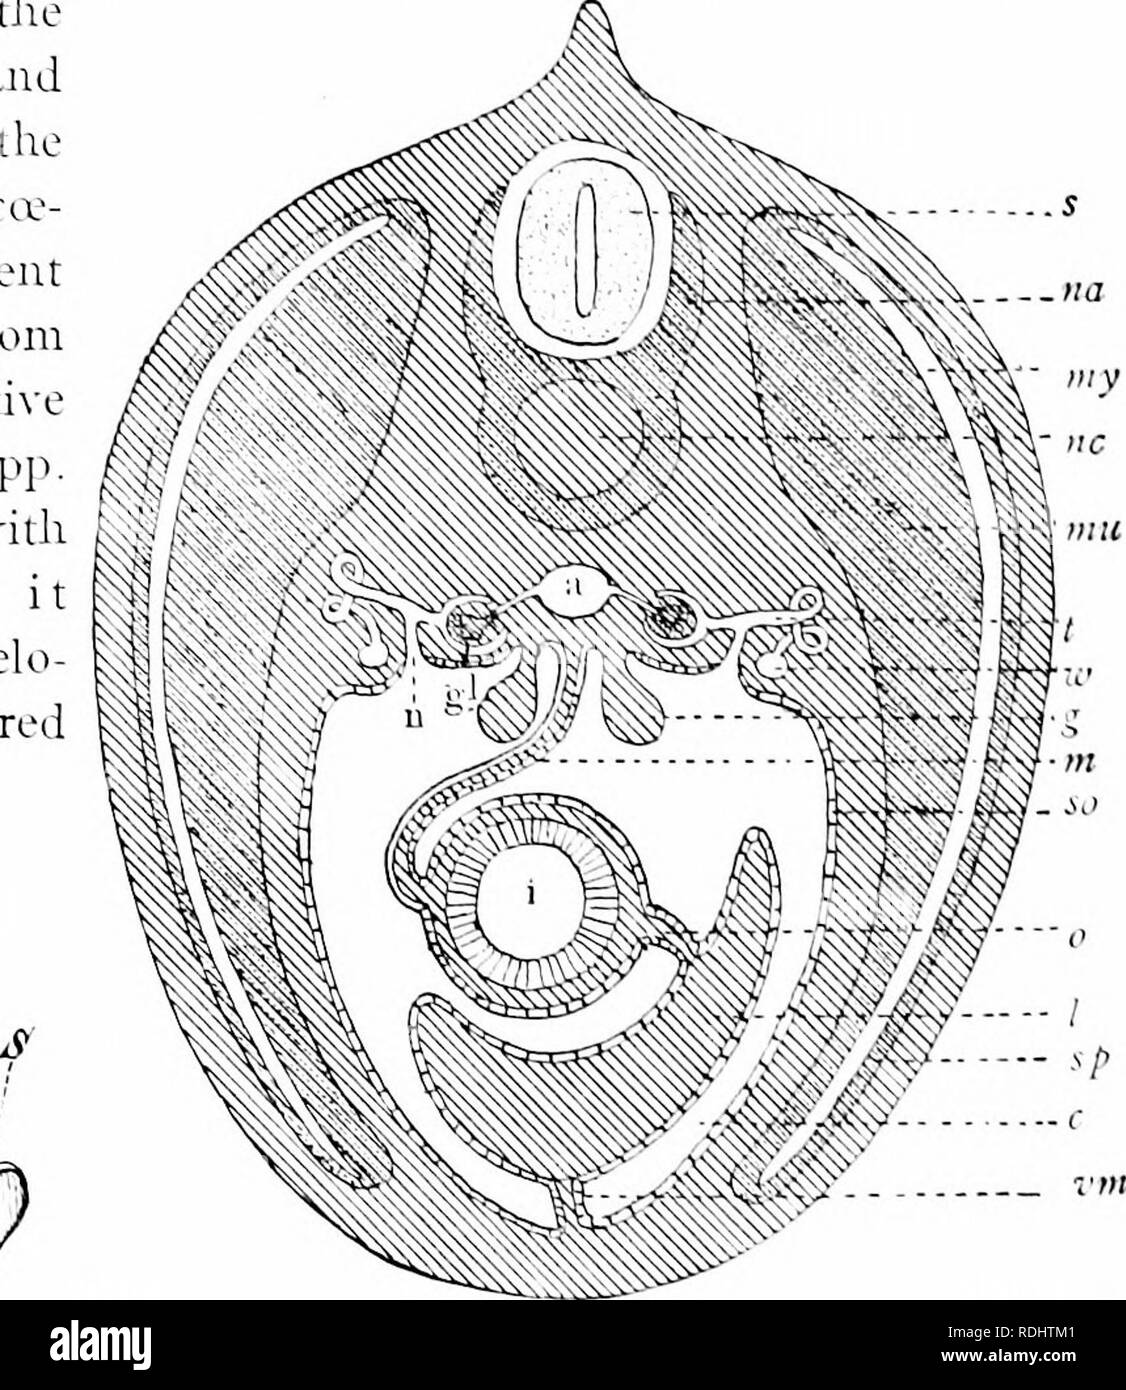 . A manual of zoology. Zoology. Fig. 534. Fio. :;^4.—Ear bones of man ^from ^ icdcrshcini'l. A. incus; /f, malleus, ,S&quot;, Fic. stapes. Fig. So^-—Section of vertebrate in abdominal region, a, dorsal aorta; 1&quot;, eu-lom; iy, tronad; 1;/, glomerulus; /, iligesti&quot;e tract; /, liver; ;;/, mesenter ; tun, tnuseubir pari of mvtoomes; »m'. its cirlom (mvoea-lrV n. omentum; .s, spinal cord; so. sp. somatic and splancltnic cpithelia; t, ncphridial tubule; ;'»/, ventral mesentery, -.e, 'oltlian duct. outgrowths from the archenterori, it follows that at first the two cavities must be .sepa Stock Photo